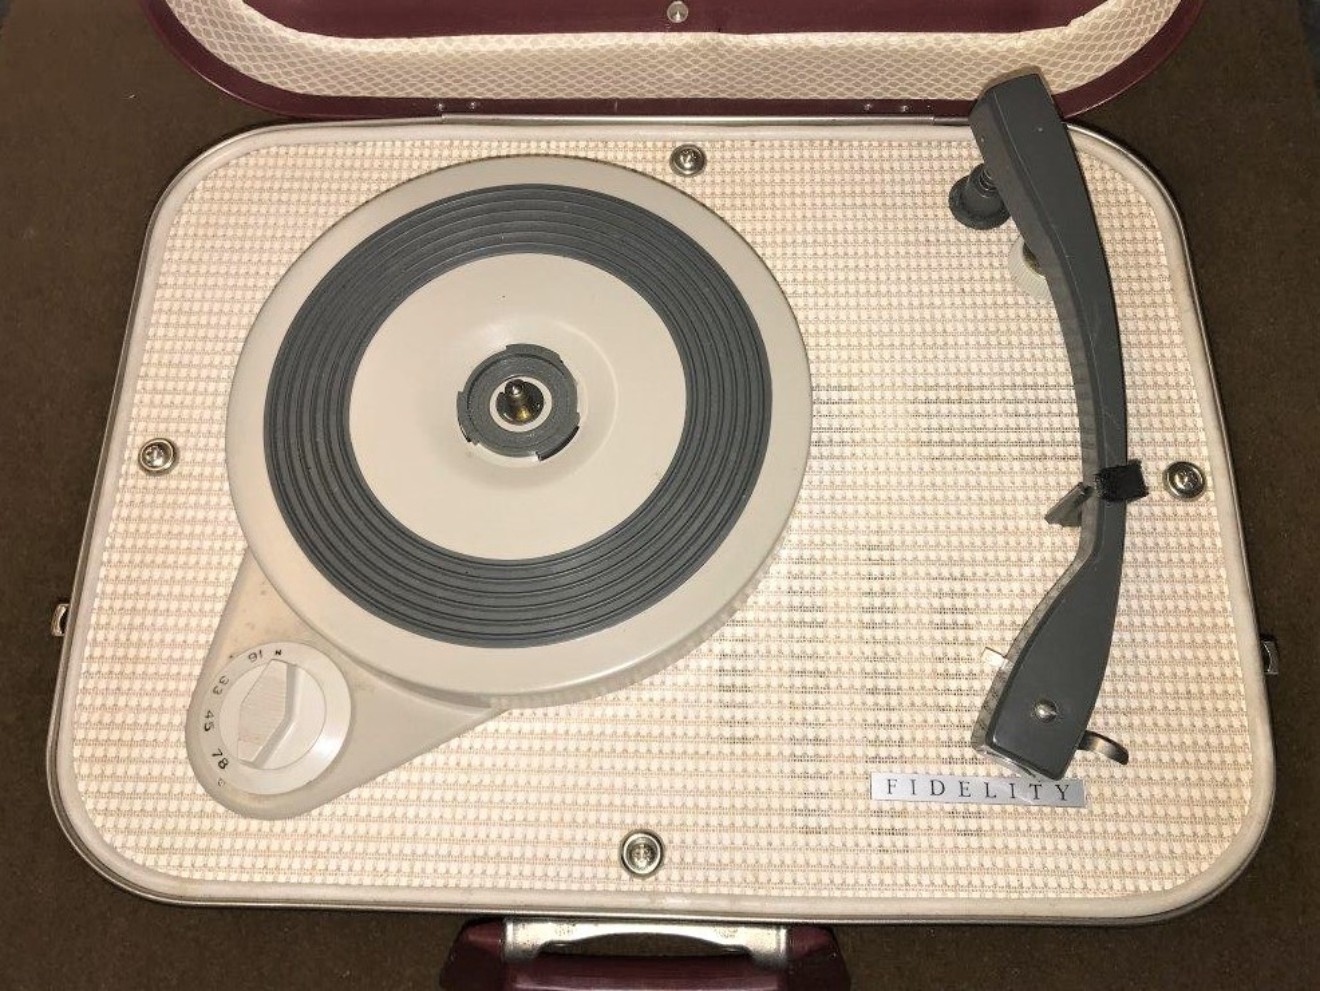 Fidelity Portable Record Player Model HF 31